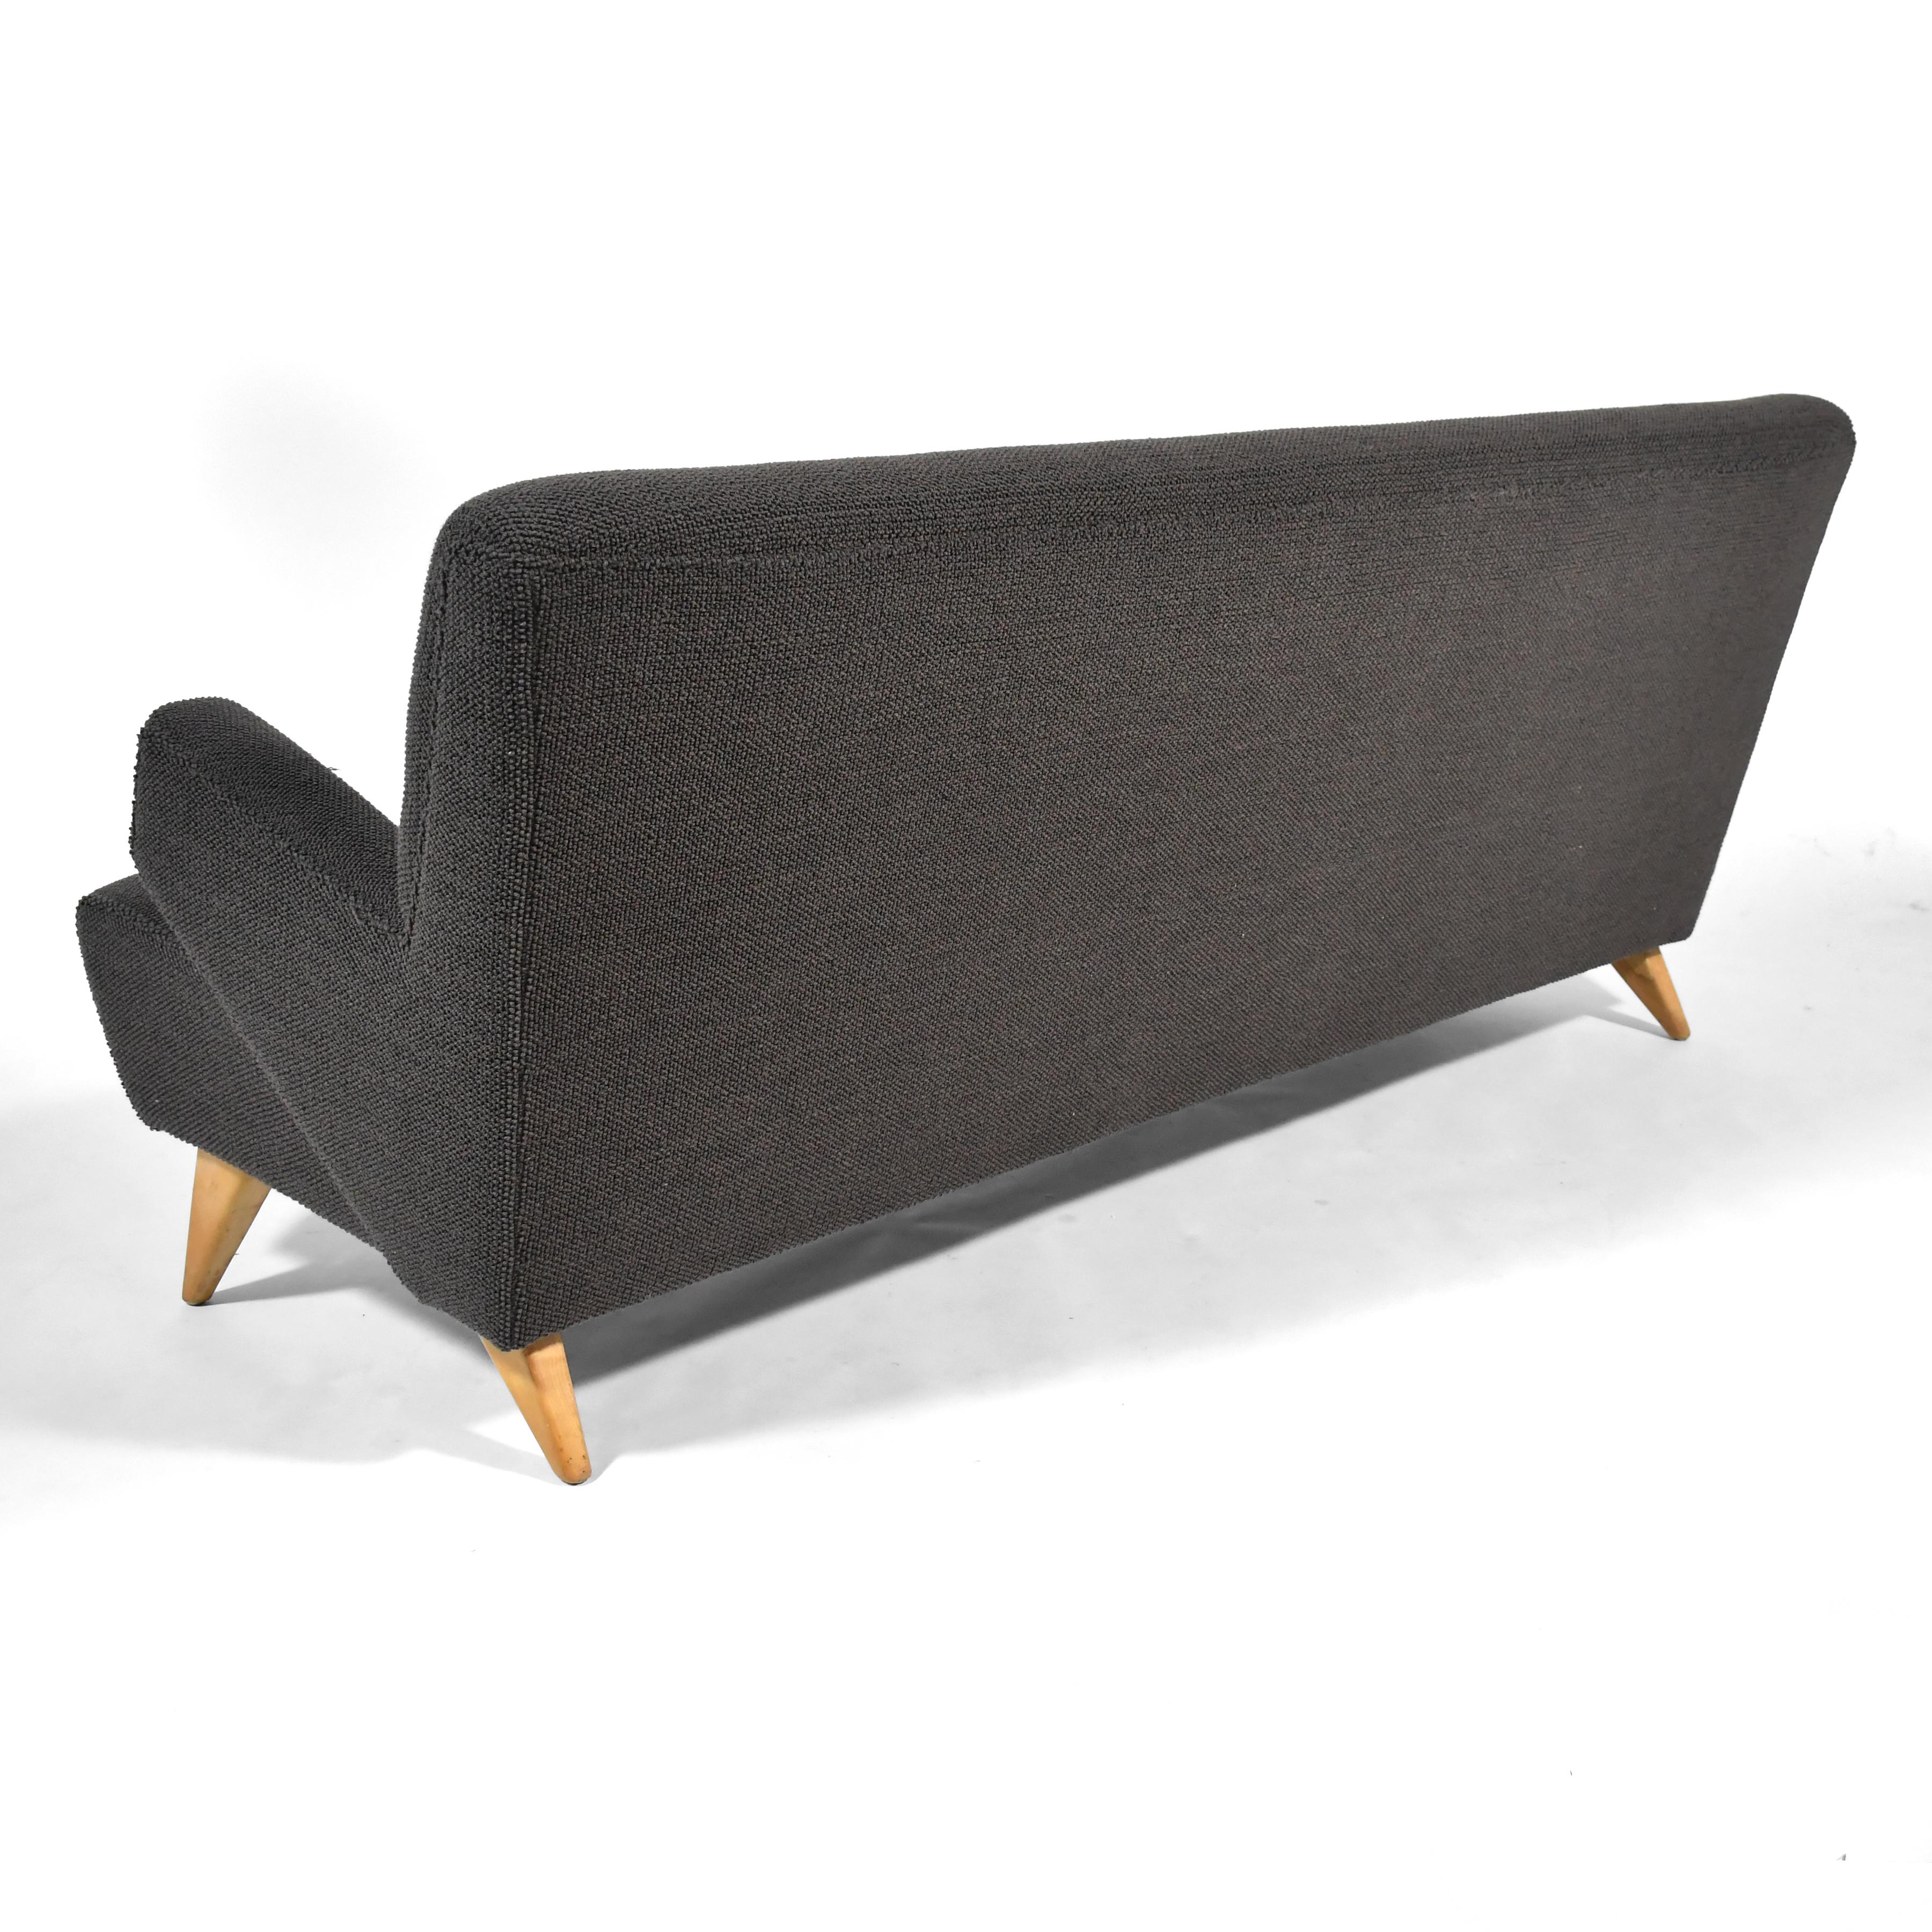 Jens Risom Sofa by Knoll In Good Condition For Sale In Highland, IN